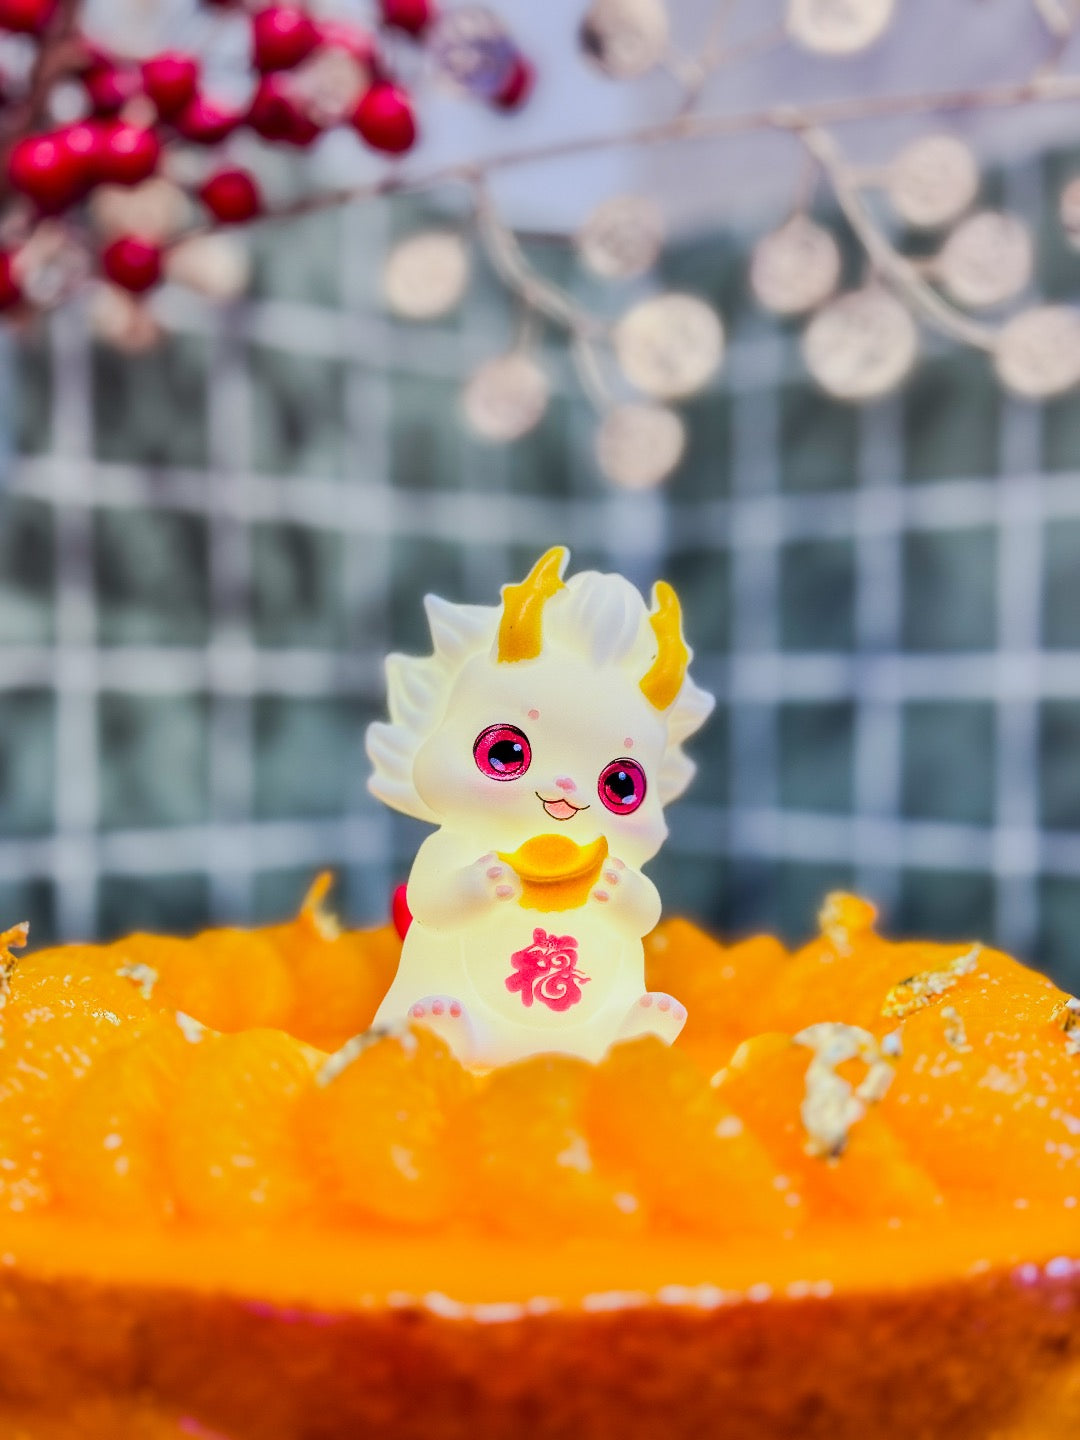 Usher in the Year of the Dragon with our decadent version of the Mandarin Orange Cake